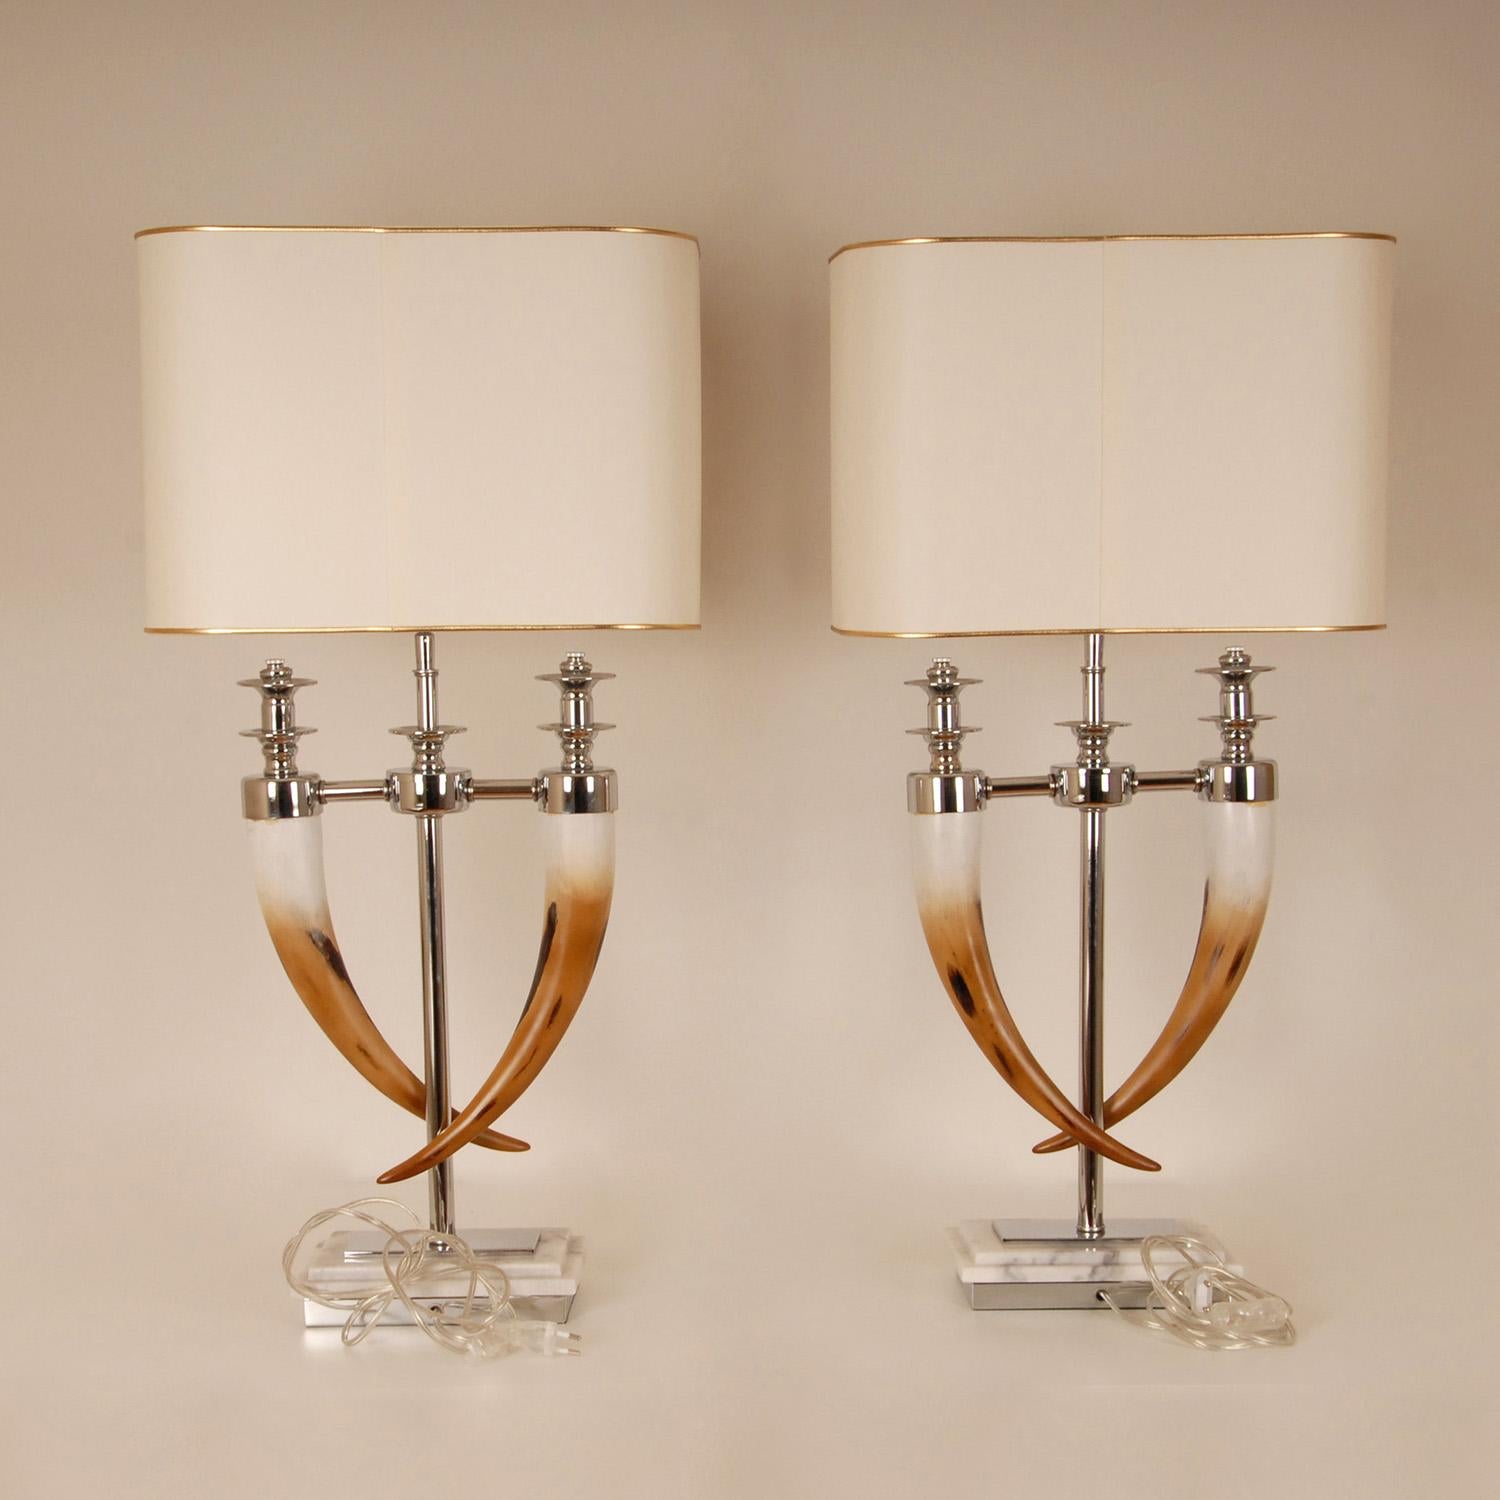 20th Century Modern Table Lamps Chrome and Faux Horn Silver and Off White Marble Base a apair For Sale